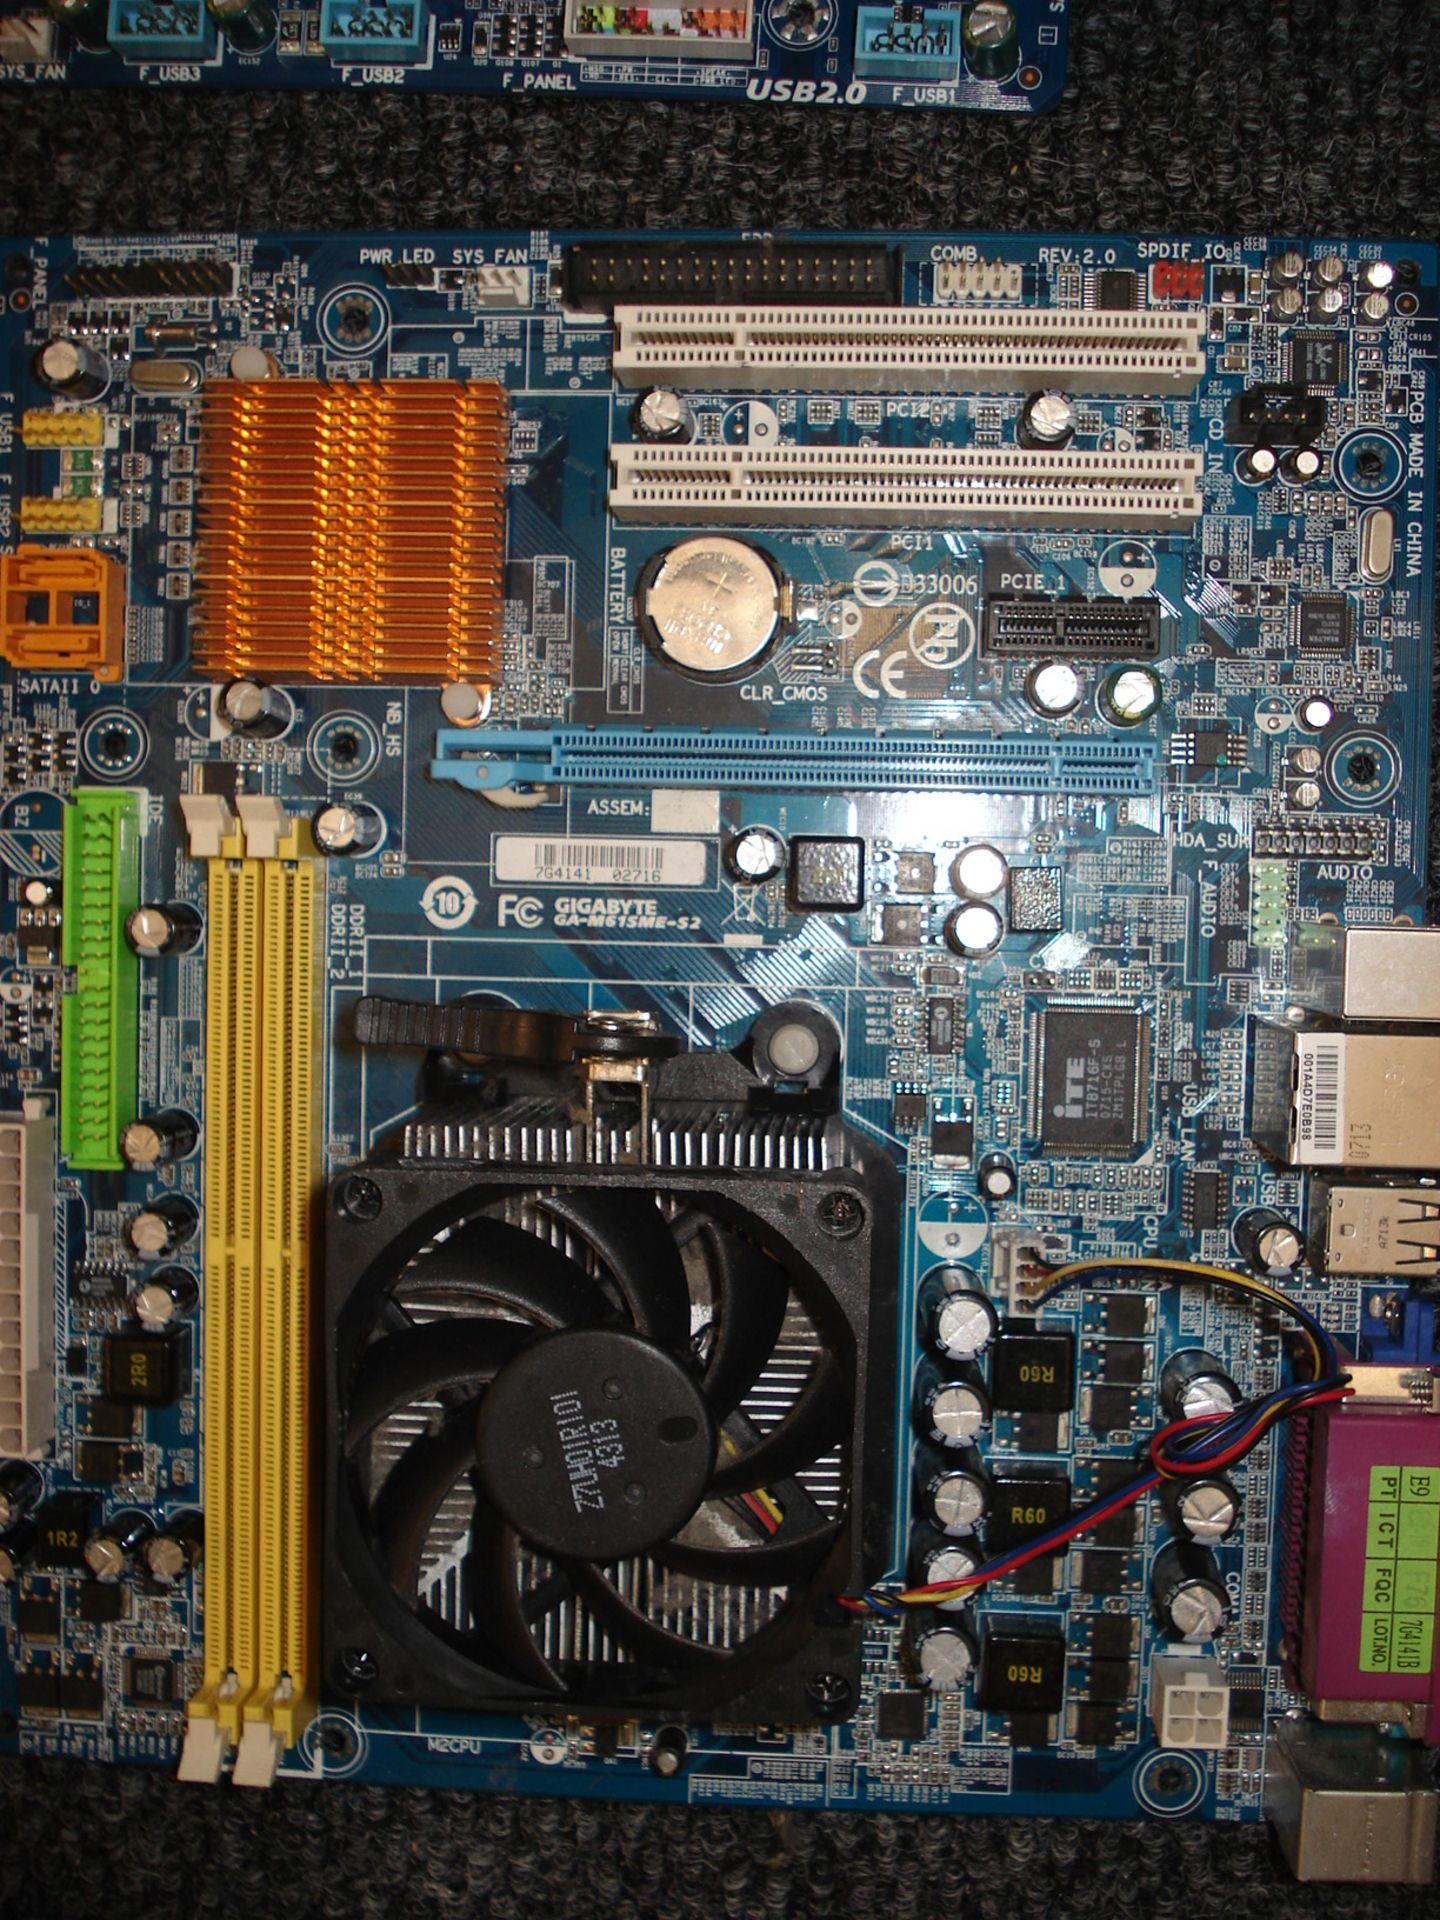 ASUS Boards - M4N68T-M LE V2 - QTY 2, M4N68T-M V2 - QTY 1, M5A7BL-M LE QTY 2, AM3 + CPU SUPPORT - - Image 7 of 12